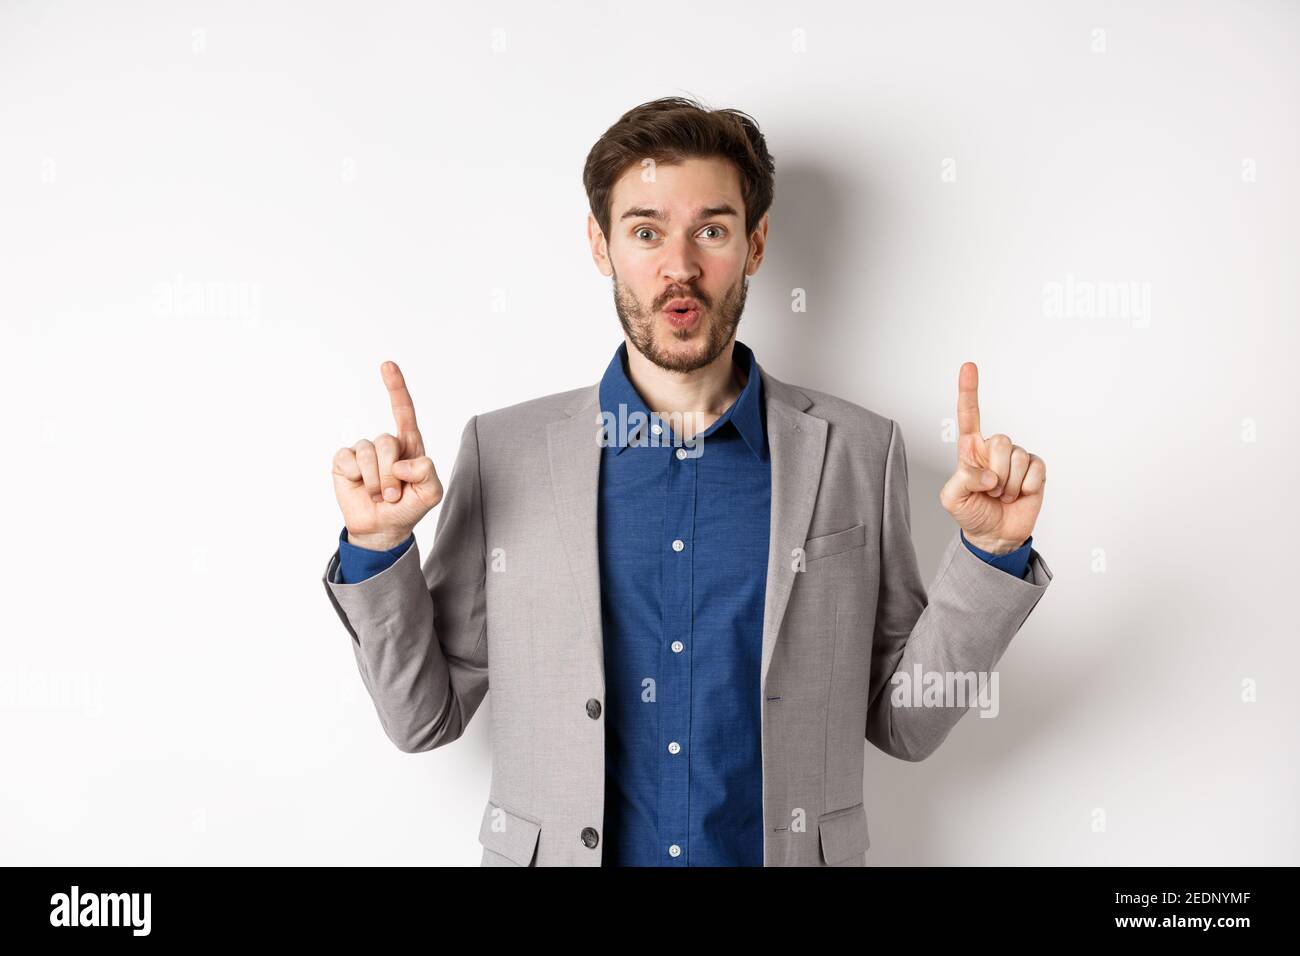 Excited businessman in suit say wow and smiling amused, pointing fingers up  at good deal, standing against white background Stock Photo - Alamy